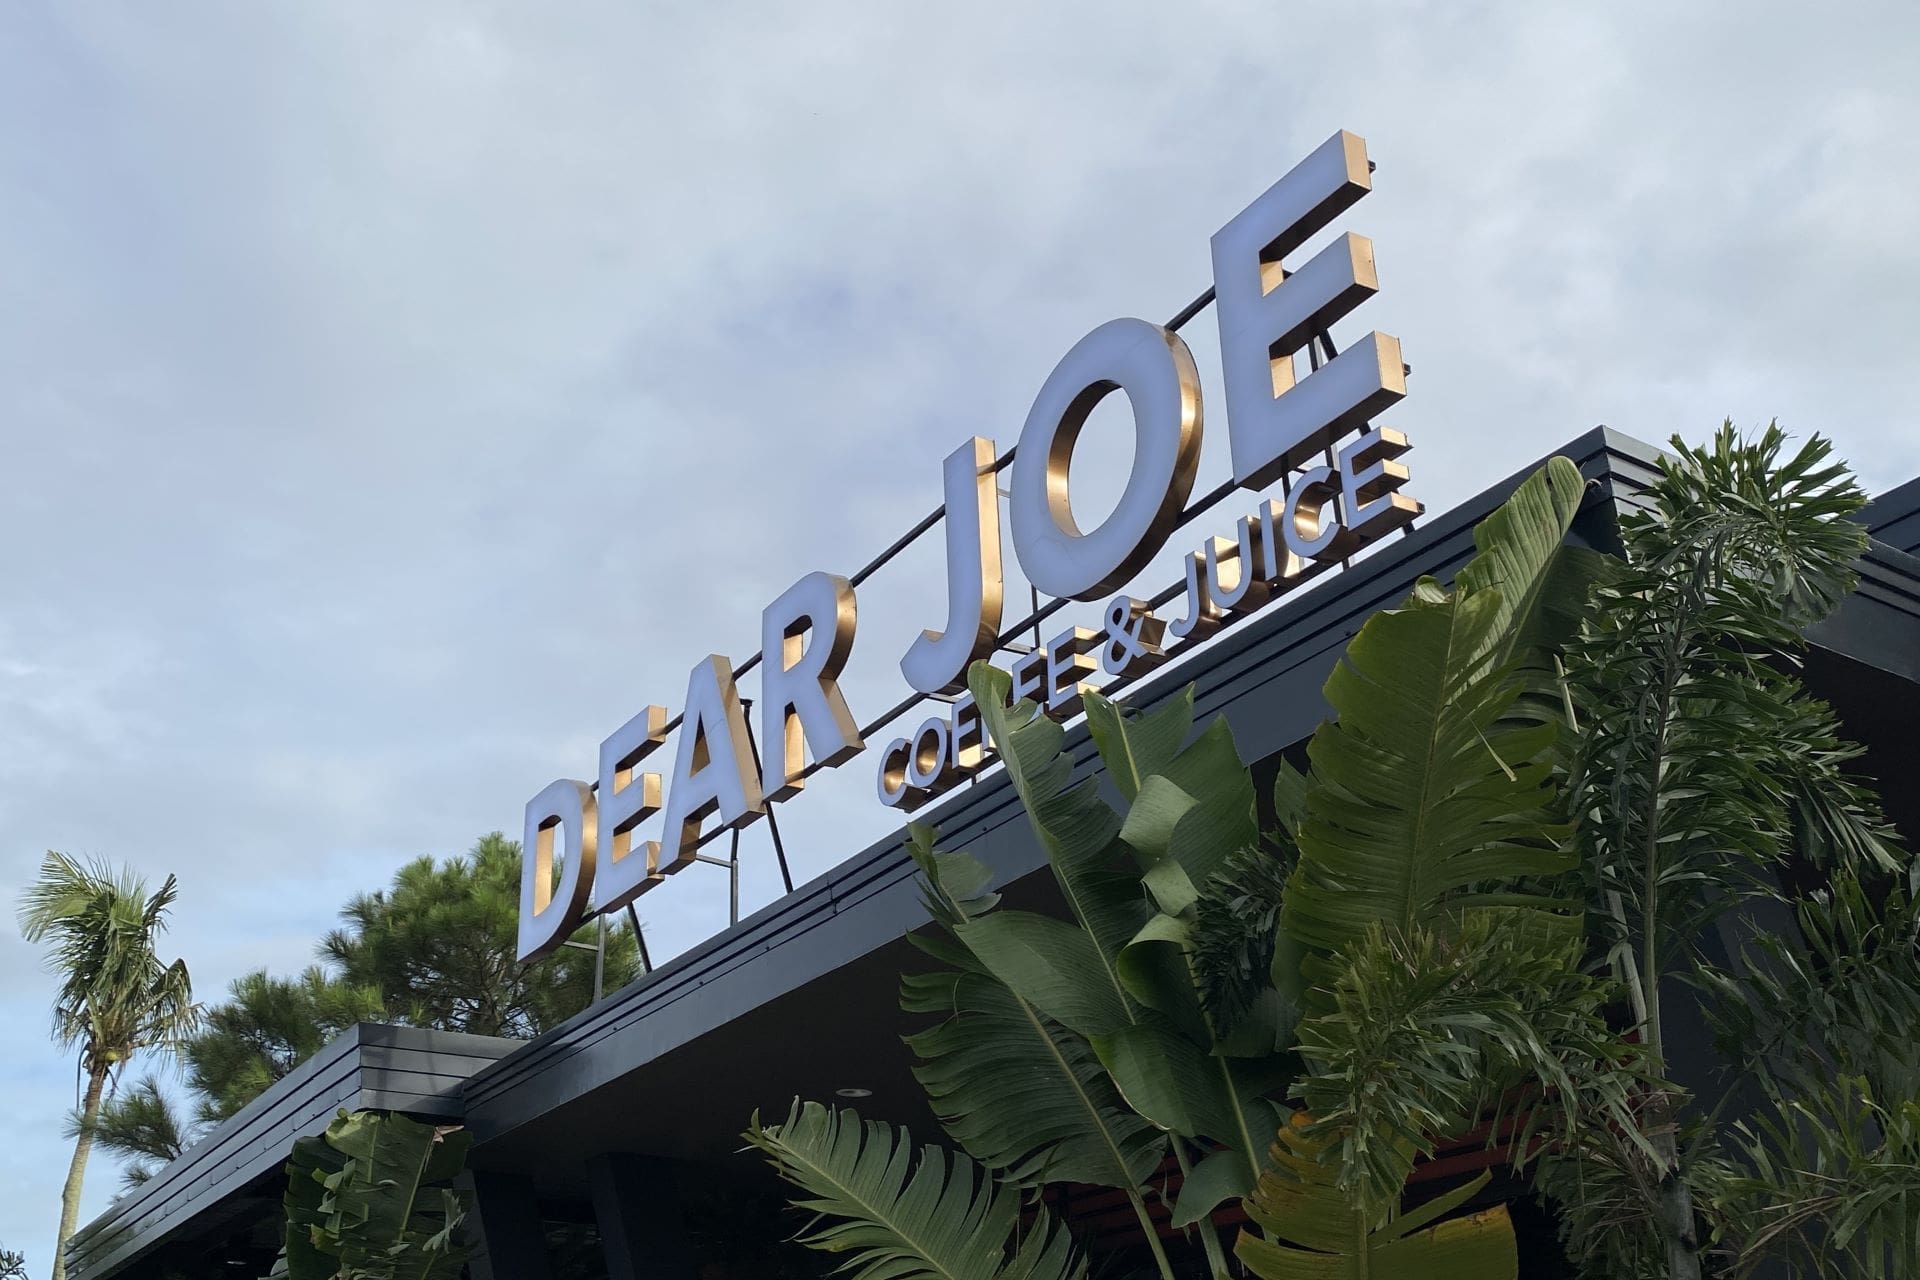 Best Selling and Must Try Food at Dear Joe Pinevale